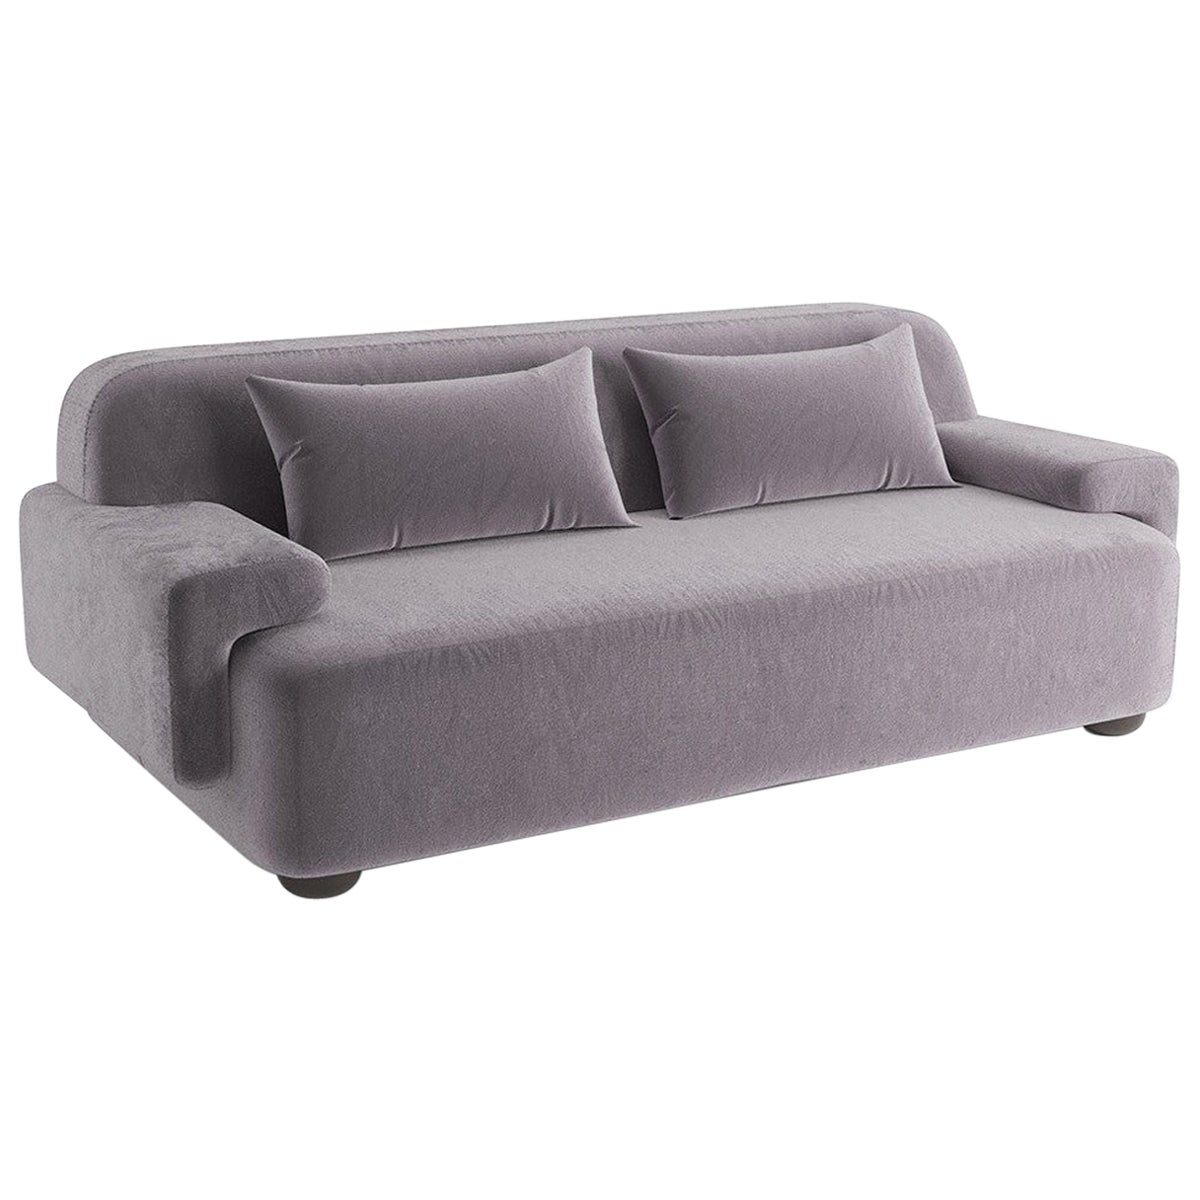 Popus Editions Lena 4 Seater Sofa in Gray Verone Velvet Upholstery For Sale